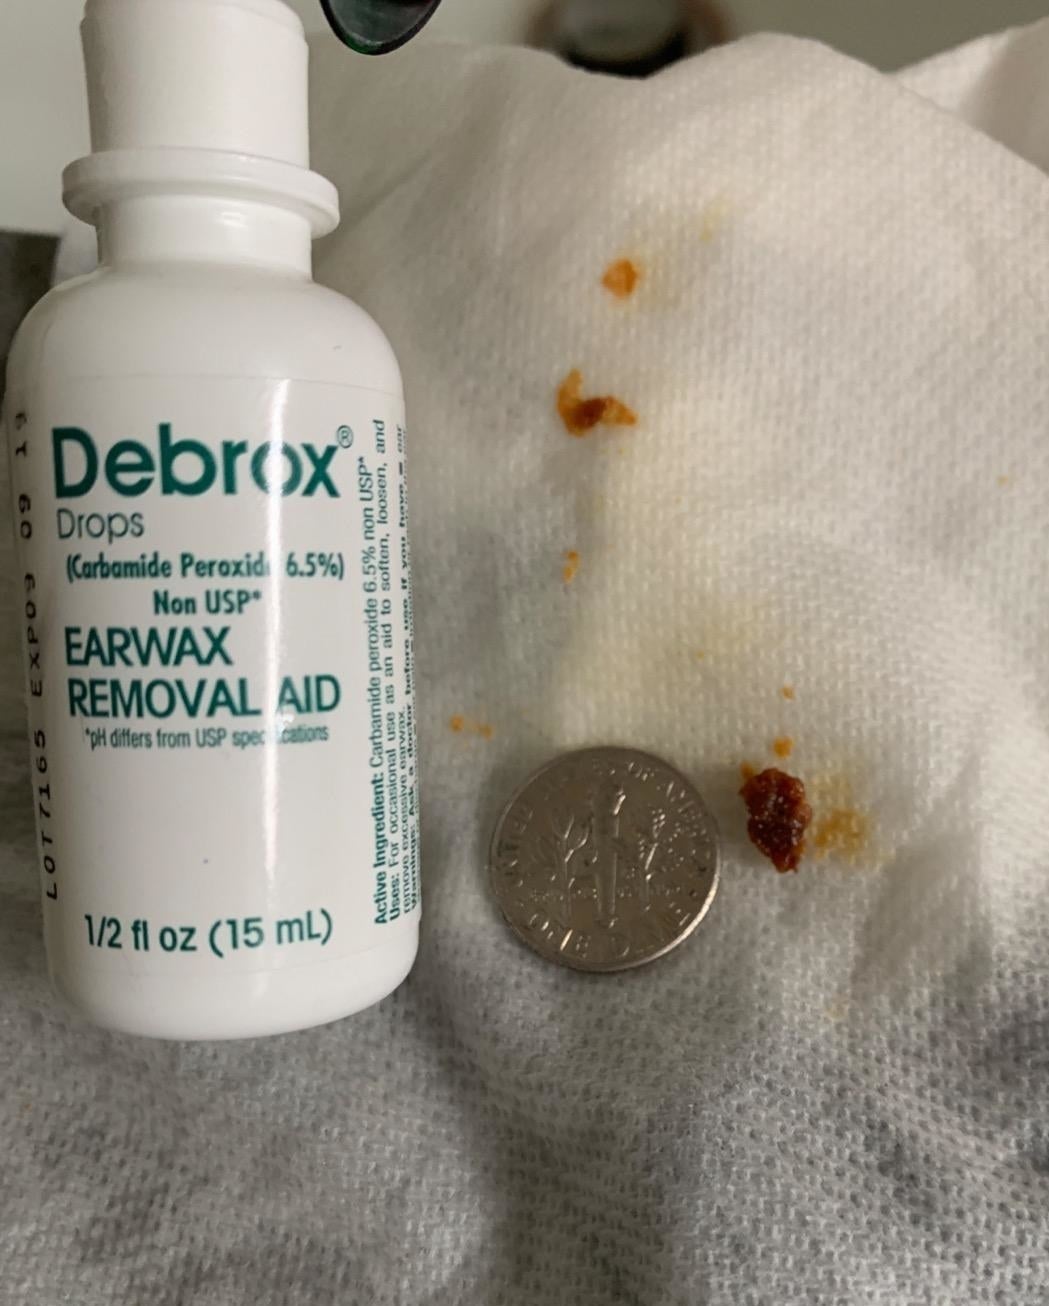 A tissue with clumps of earwax next to a dime for size as well as the container of drops